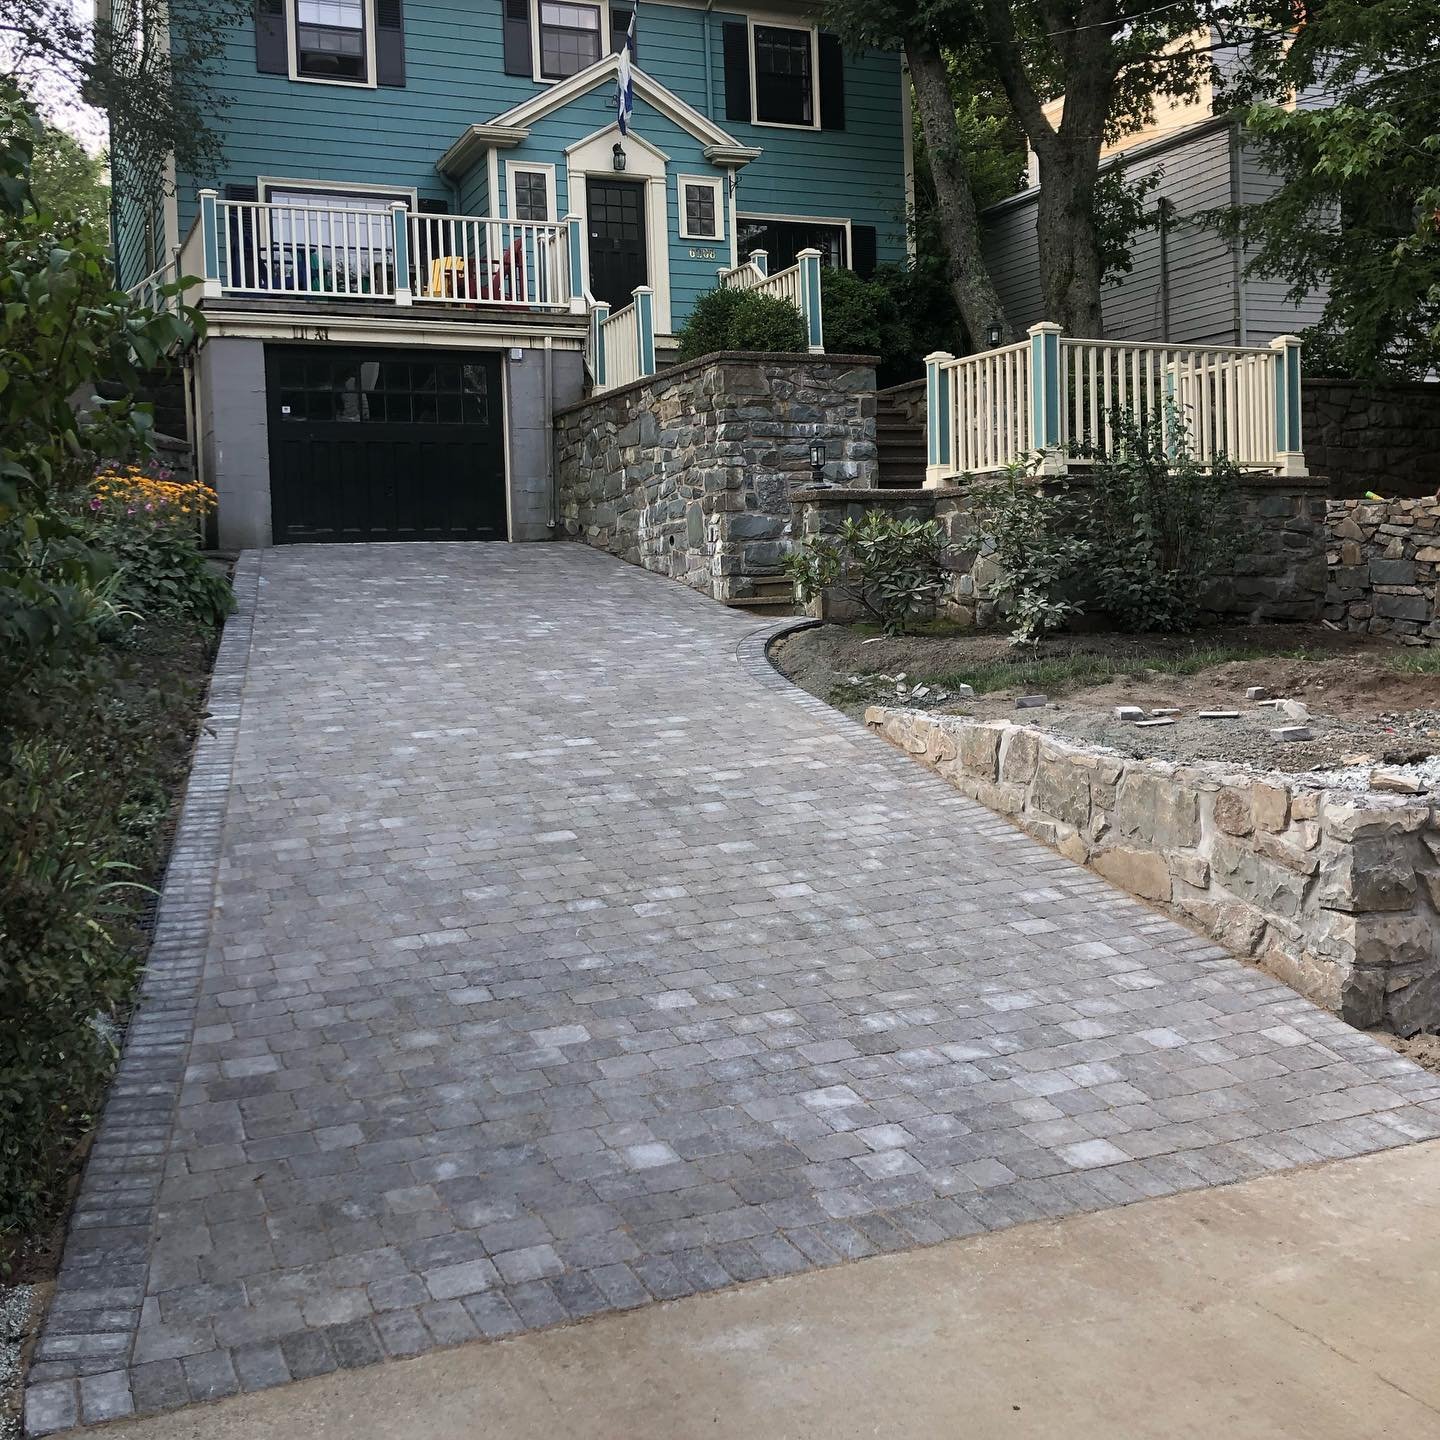 Clean and simple 17 degree sloped eurostone #driveway with a oldstone border turned out amazing during the #humidex spike. 

#hardscape #landscape #landscapedesign #contractor #brick #work #halifax #novascotia